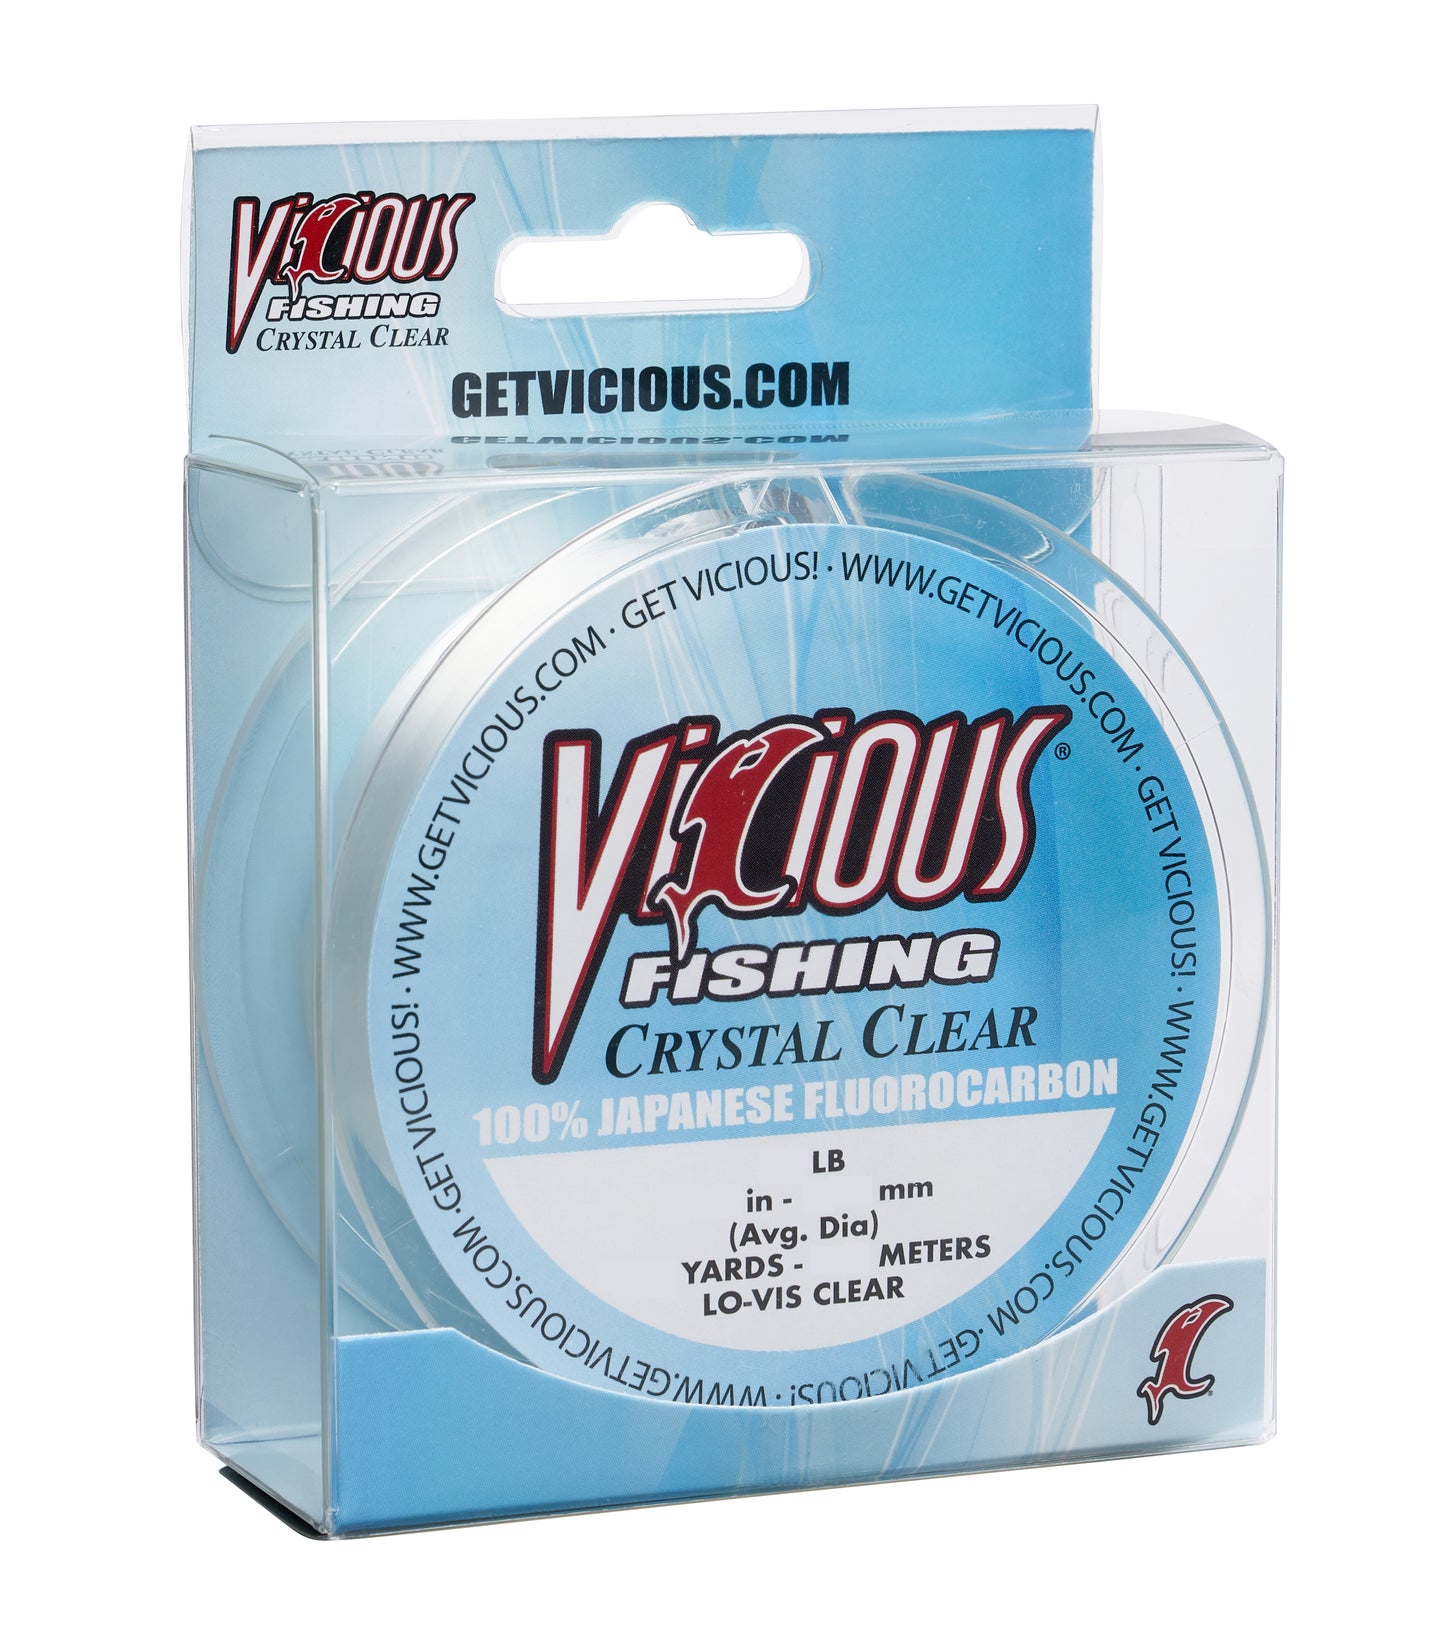 Vicious Crystal Clear 100% Japanese Fluorocarbon - 200 Yards